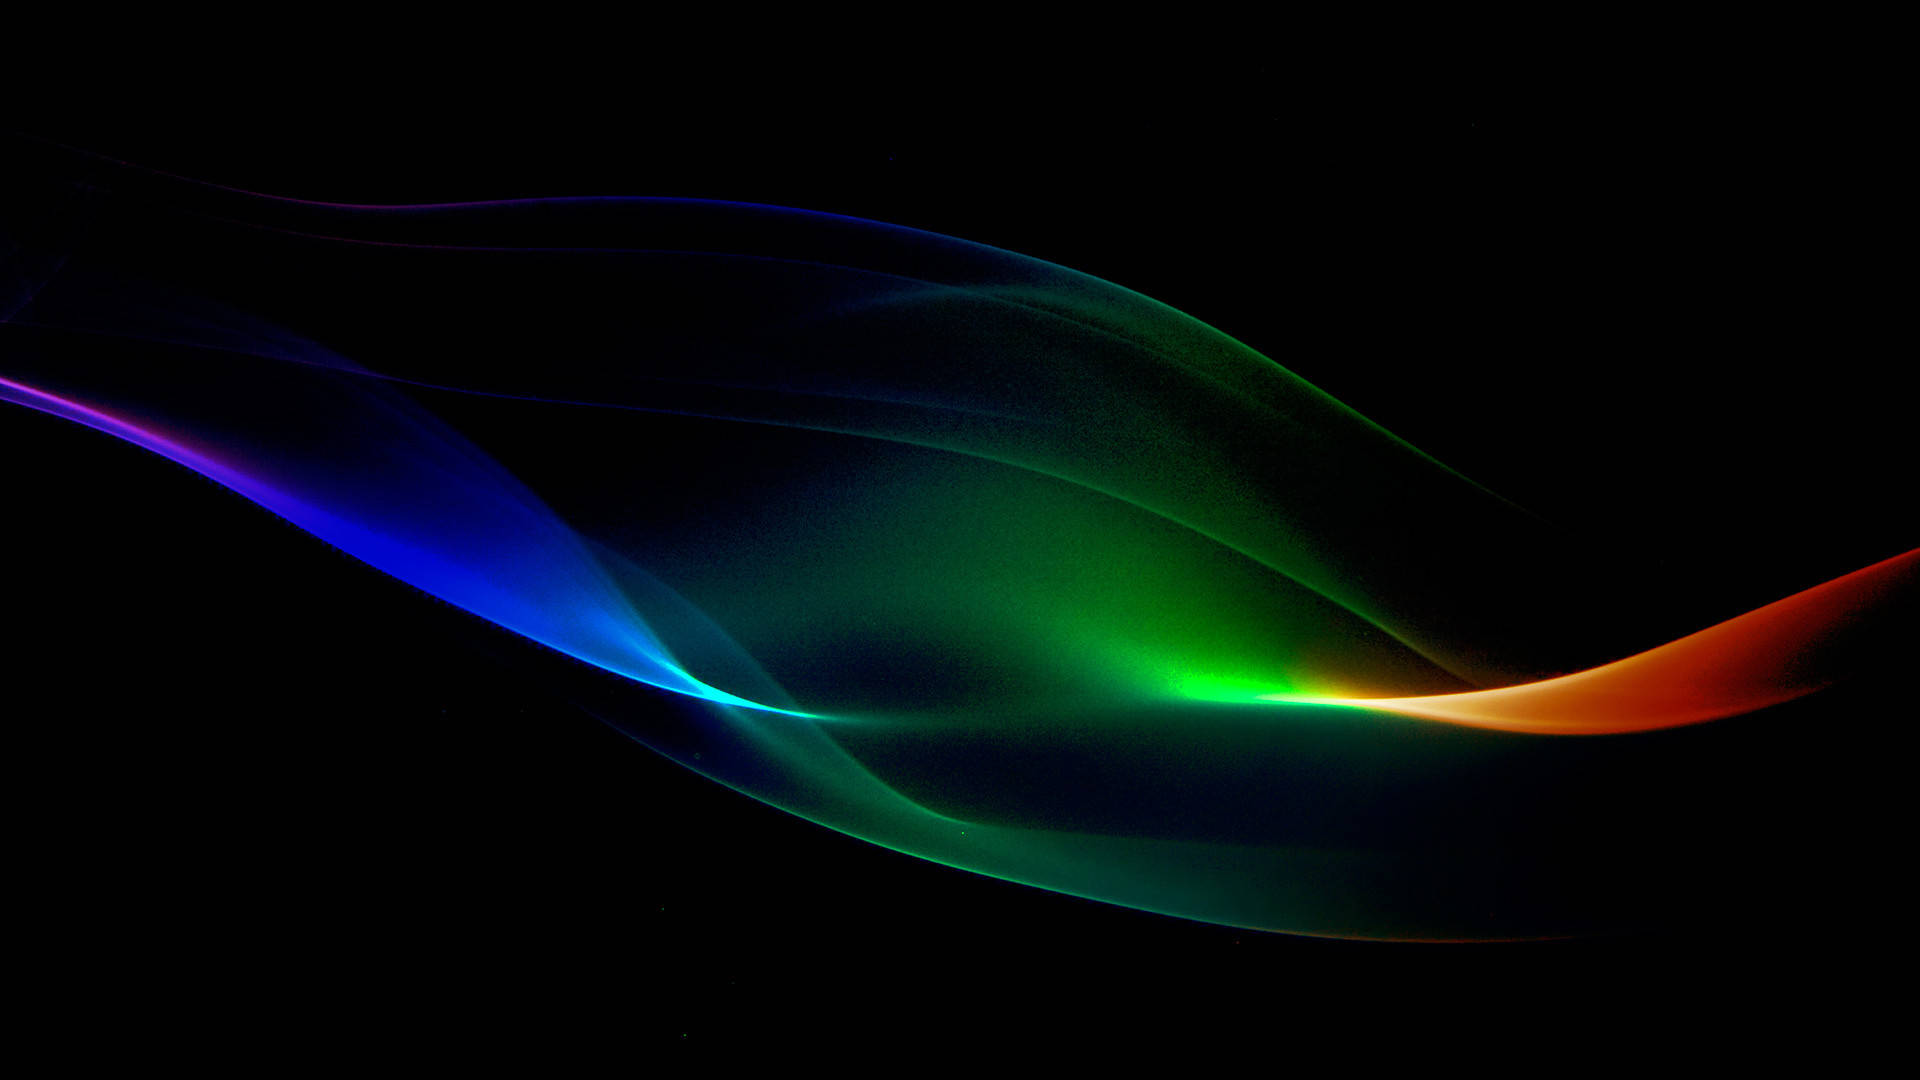 Download High Quality Black Colorful Waves Wallpaper | Wallpapers.com